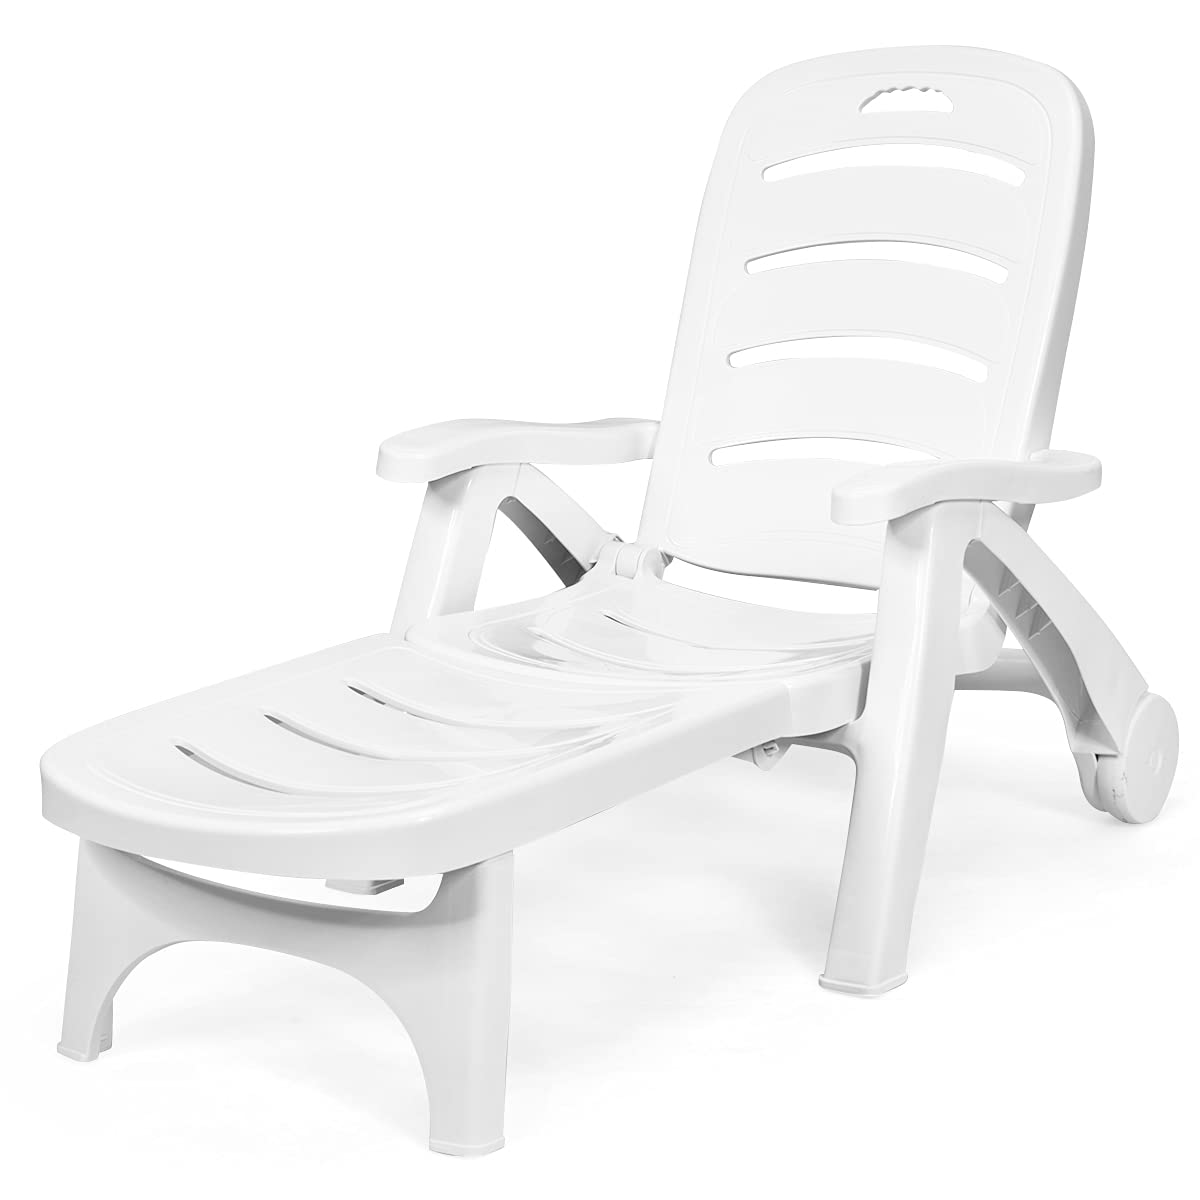 Giantex Folding Camping Lounge Chair, Portable Rolling Recliner w/Wheels, 5 Adjustable Positions, White